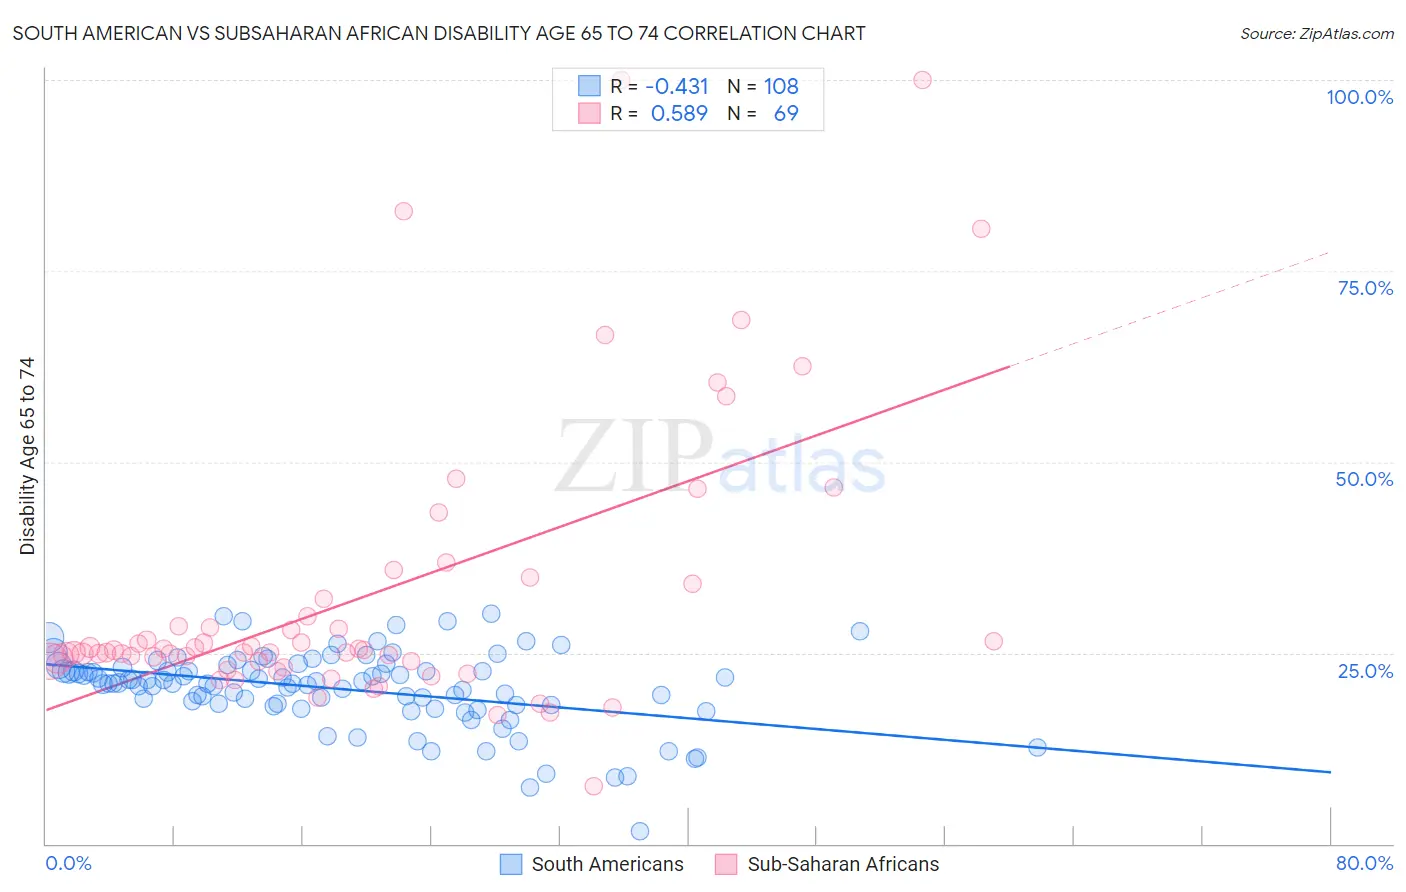 South American vs Subsaharan African Disability Age 65 to 74